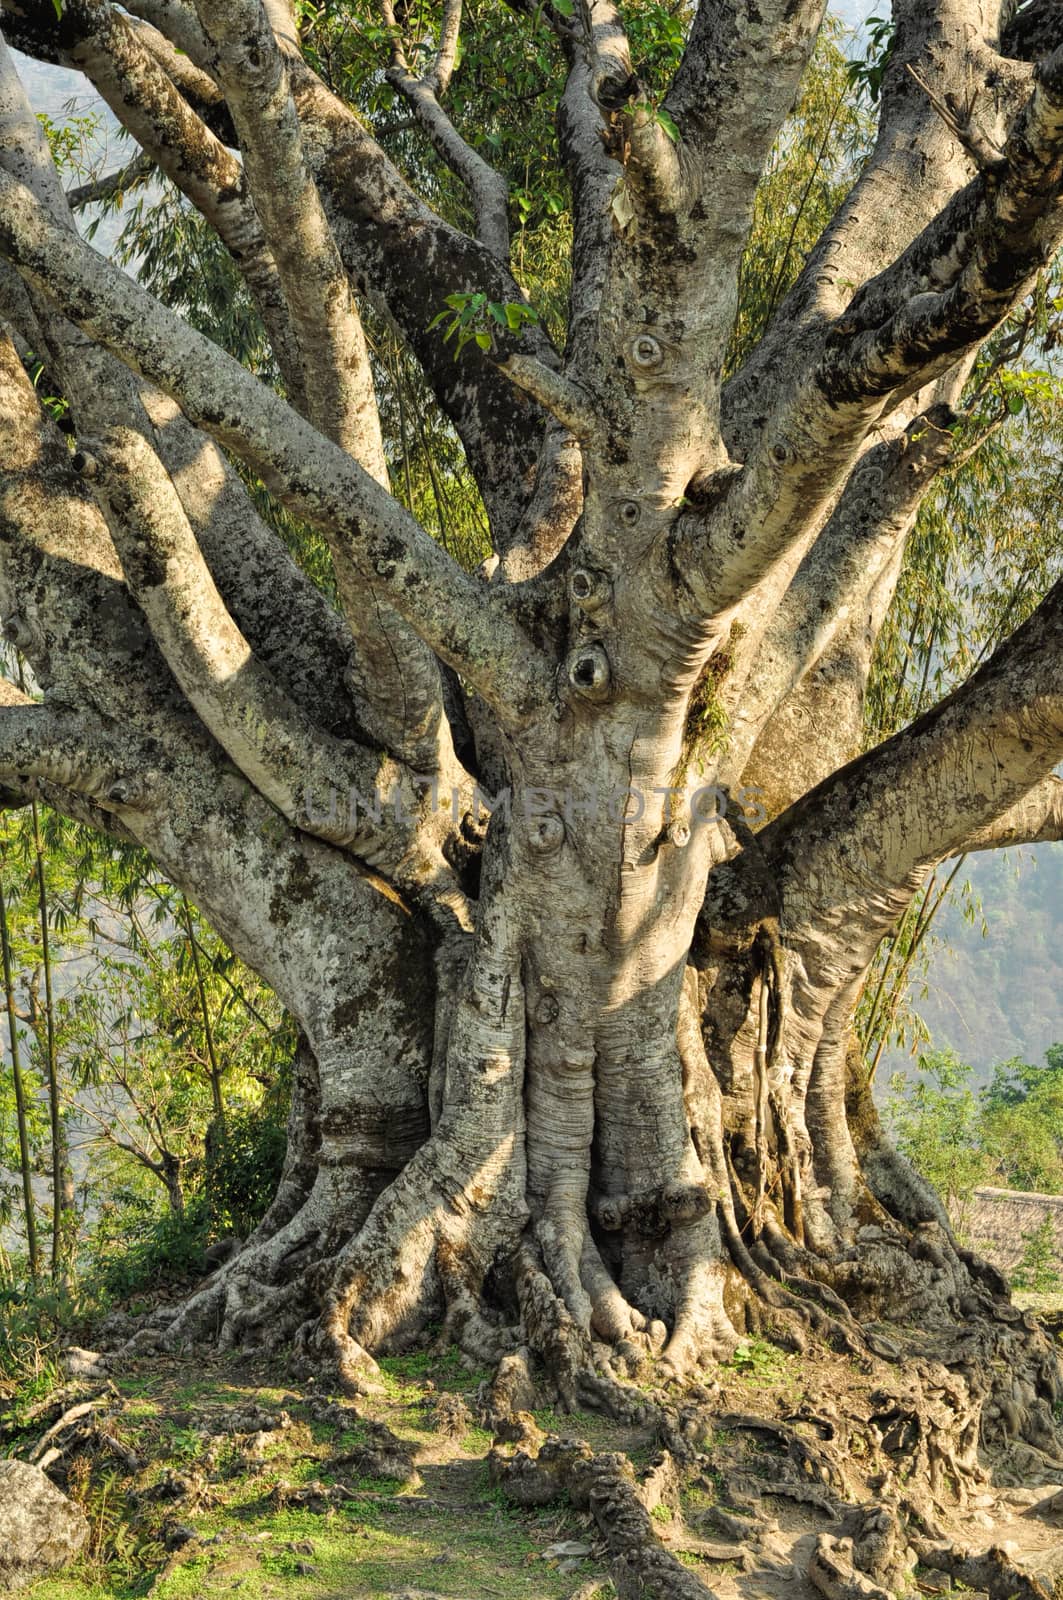 Close-up view of a magnificent old tree in Nepal